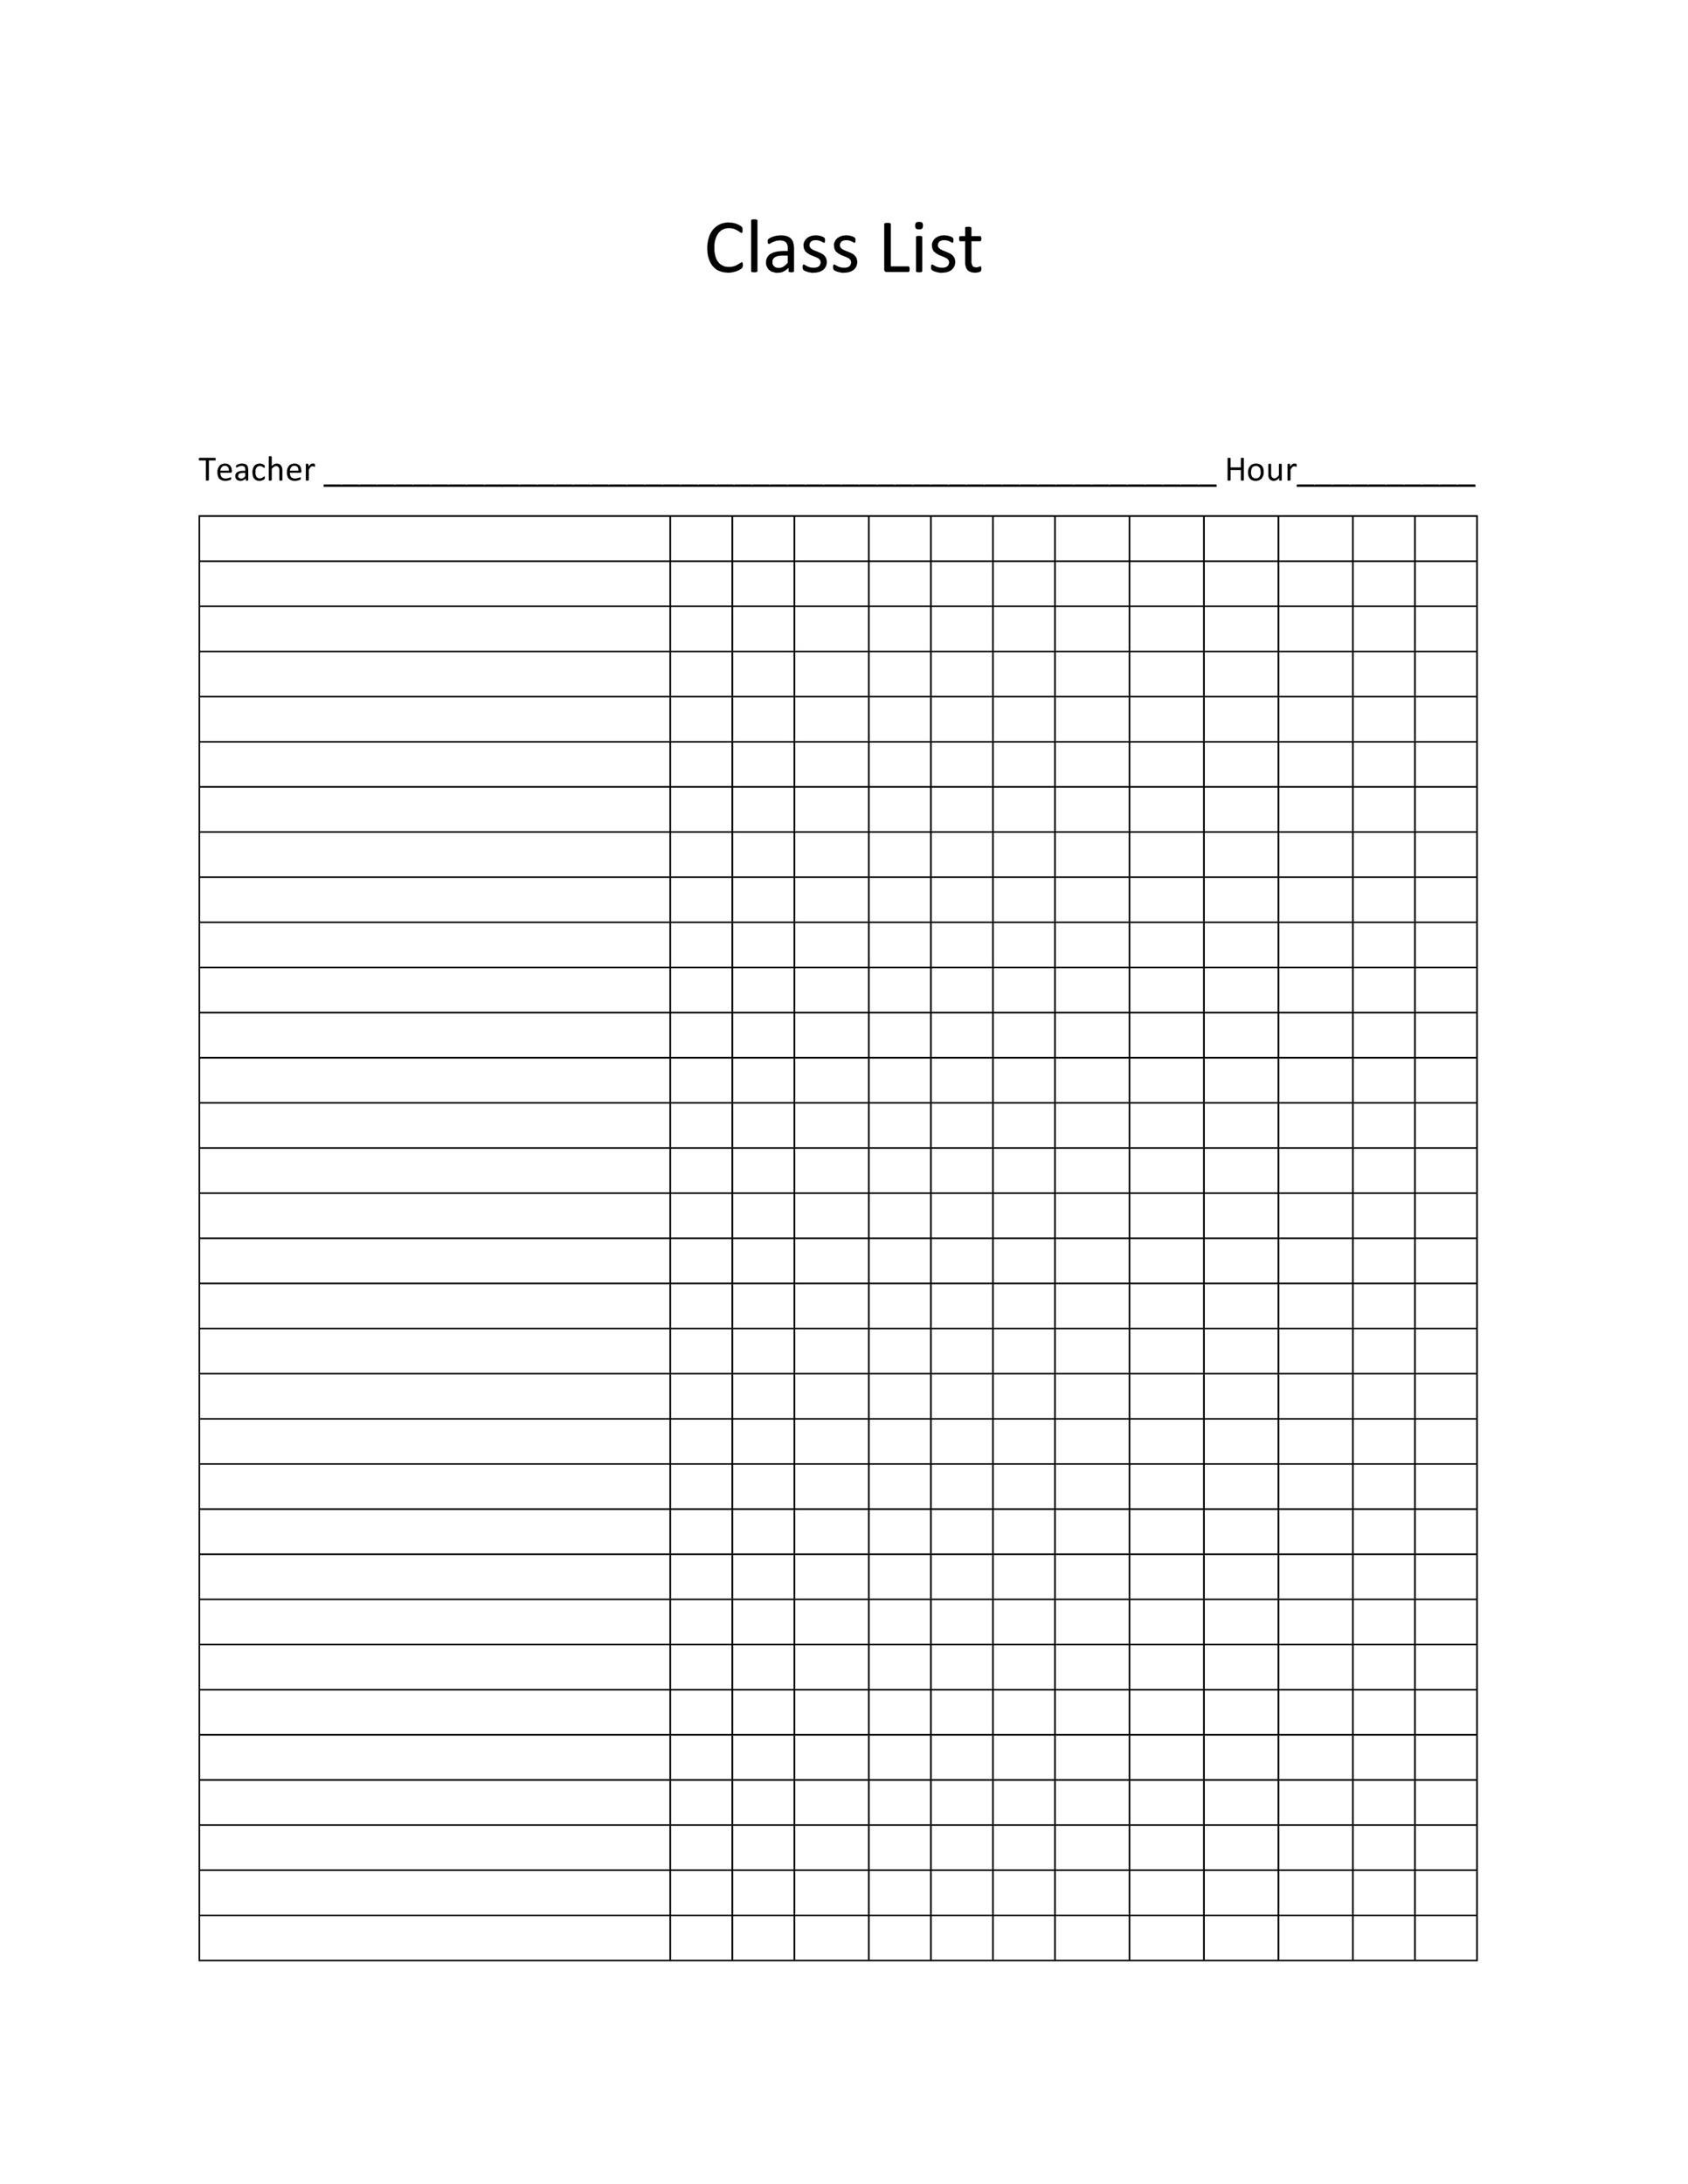 37 Class Roster Templates Student Roster Templates for Teachers